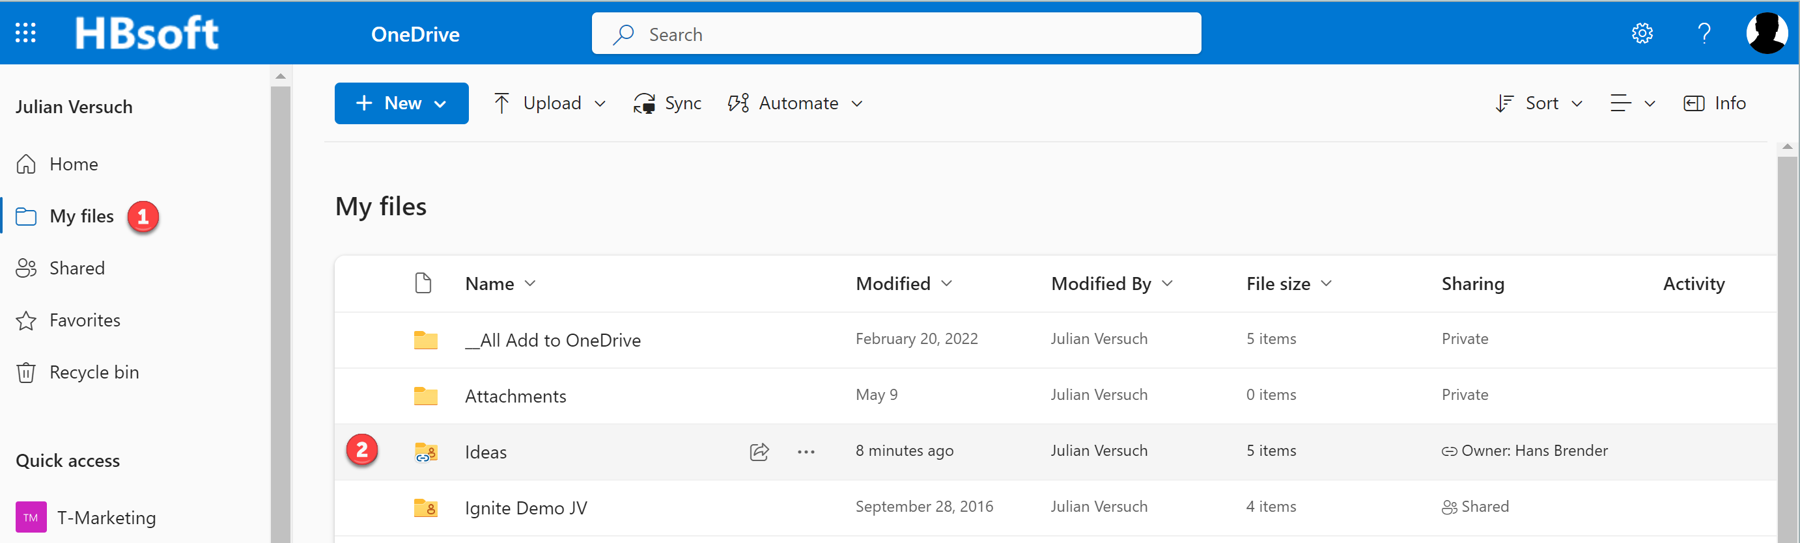 The image shows OneDrive in Julian’s browser with the My files tab selected.